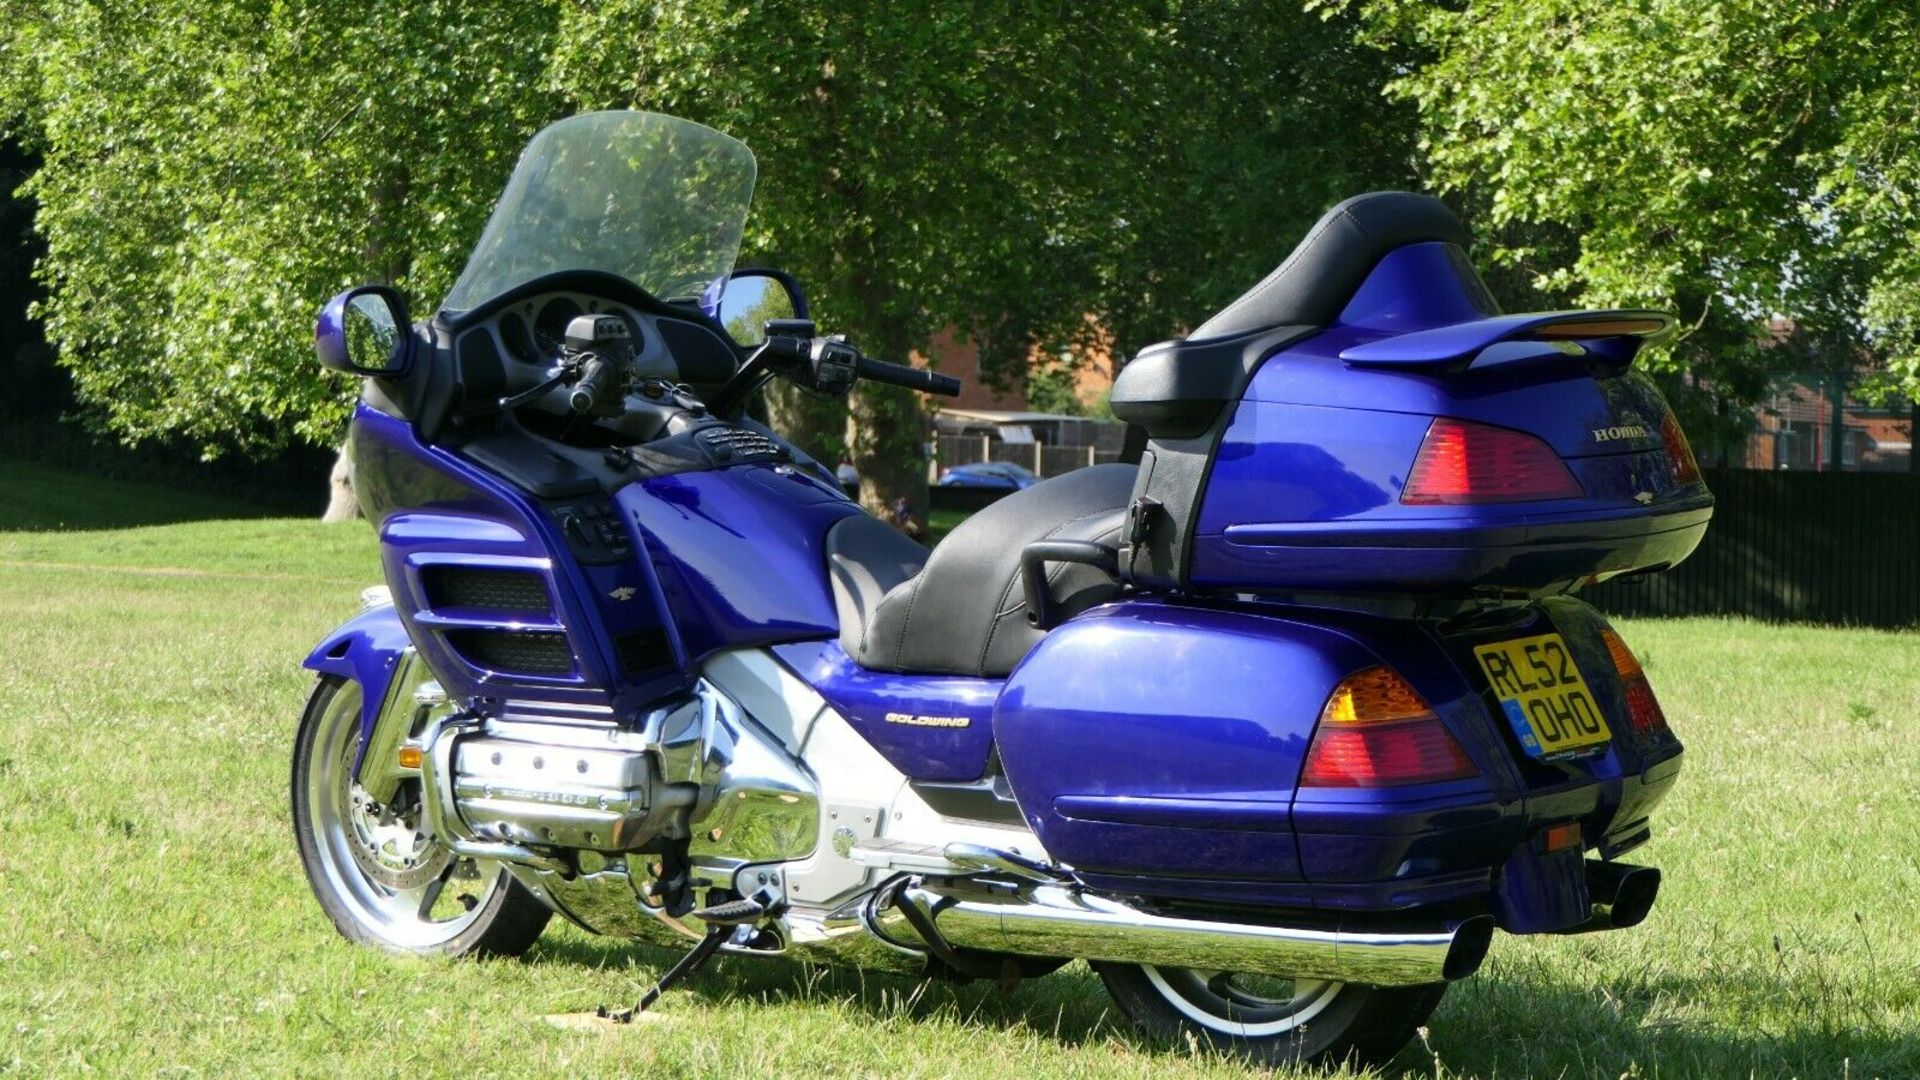 HONDA GL1800 GOLDWING ABS 2003 MOTORCYCLE 51K MILES - EXTRAS, MOT, LOW MILES, FSH, GREAT CONDITION - Image 7 of 12